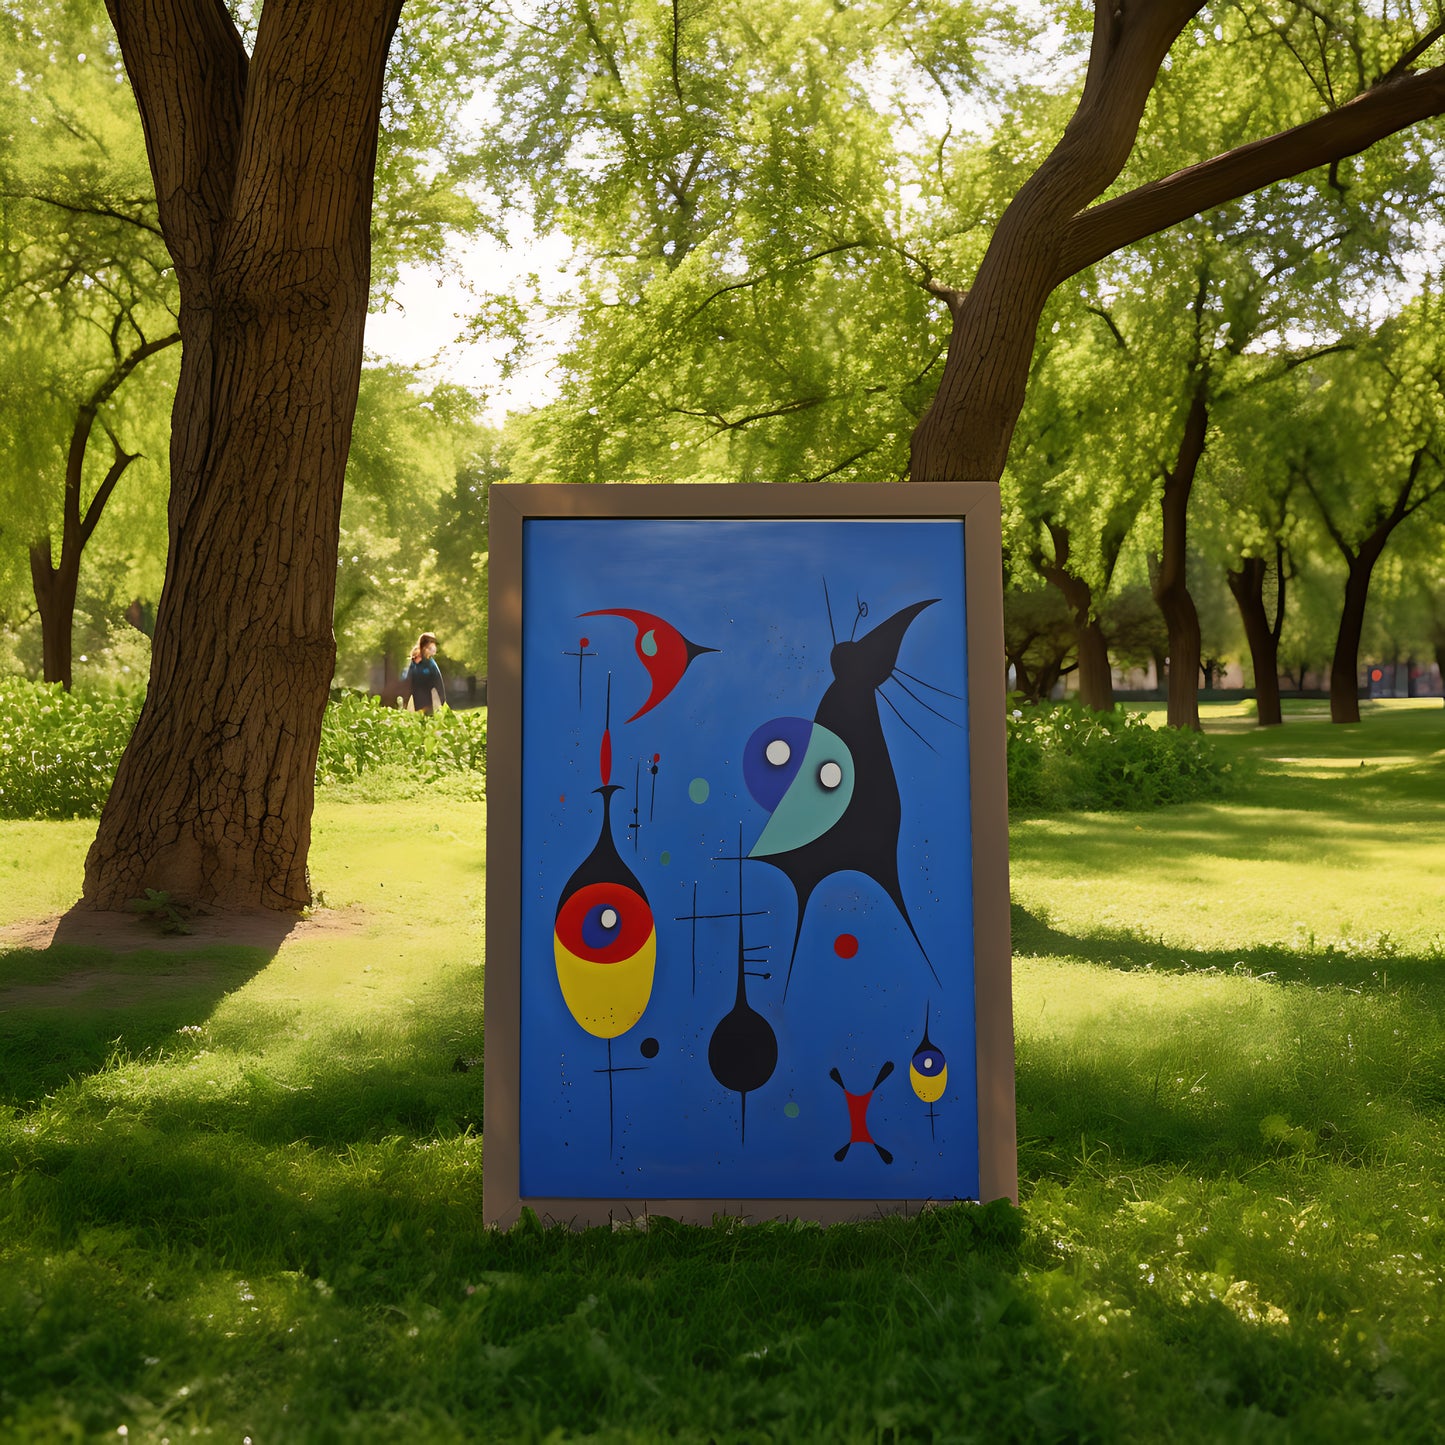 A colorful abstract painting on an easel in a lush park setting.